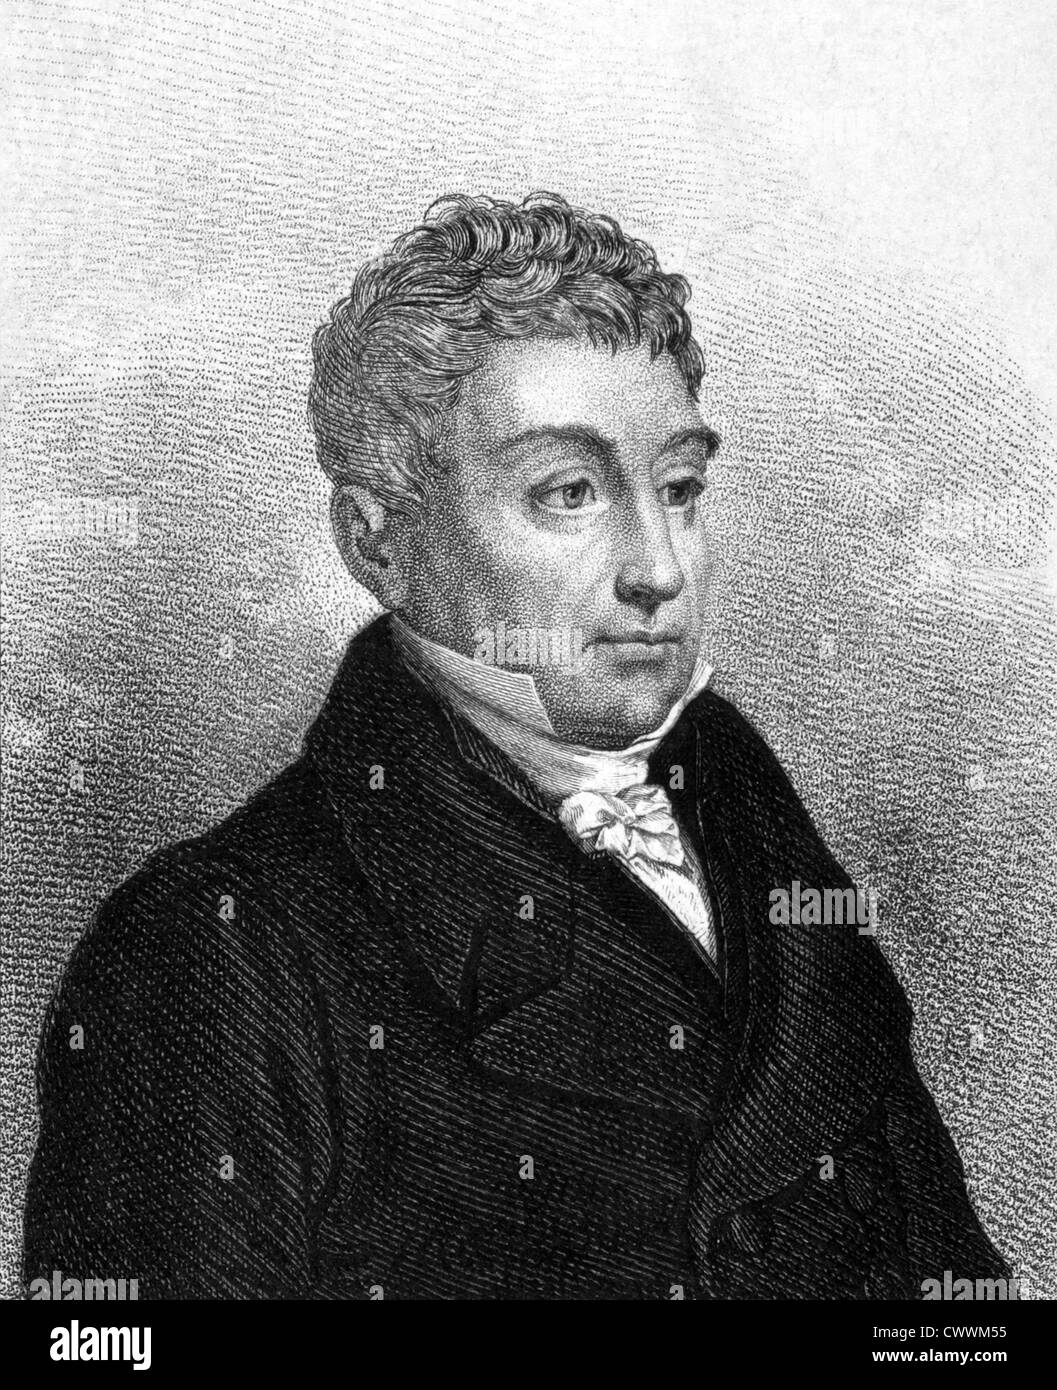 Gilbert du Motier marquis de Lafayette (1757-1834) on engraving from 1859. French aristocrat and military officer. Stock Photo